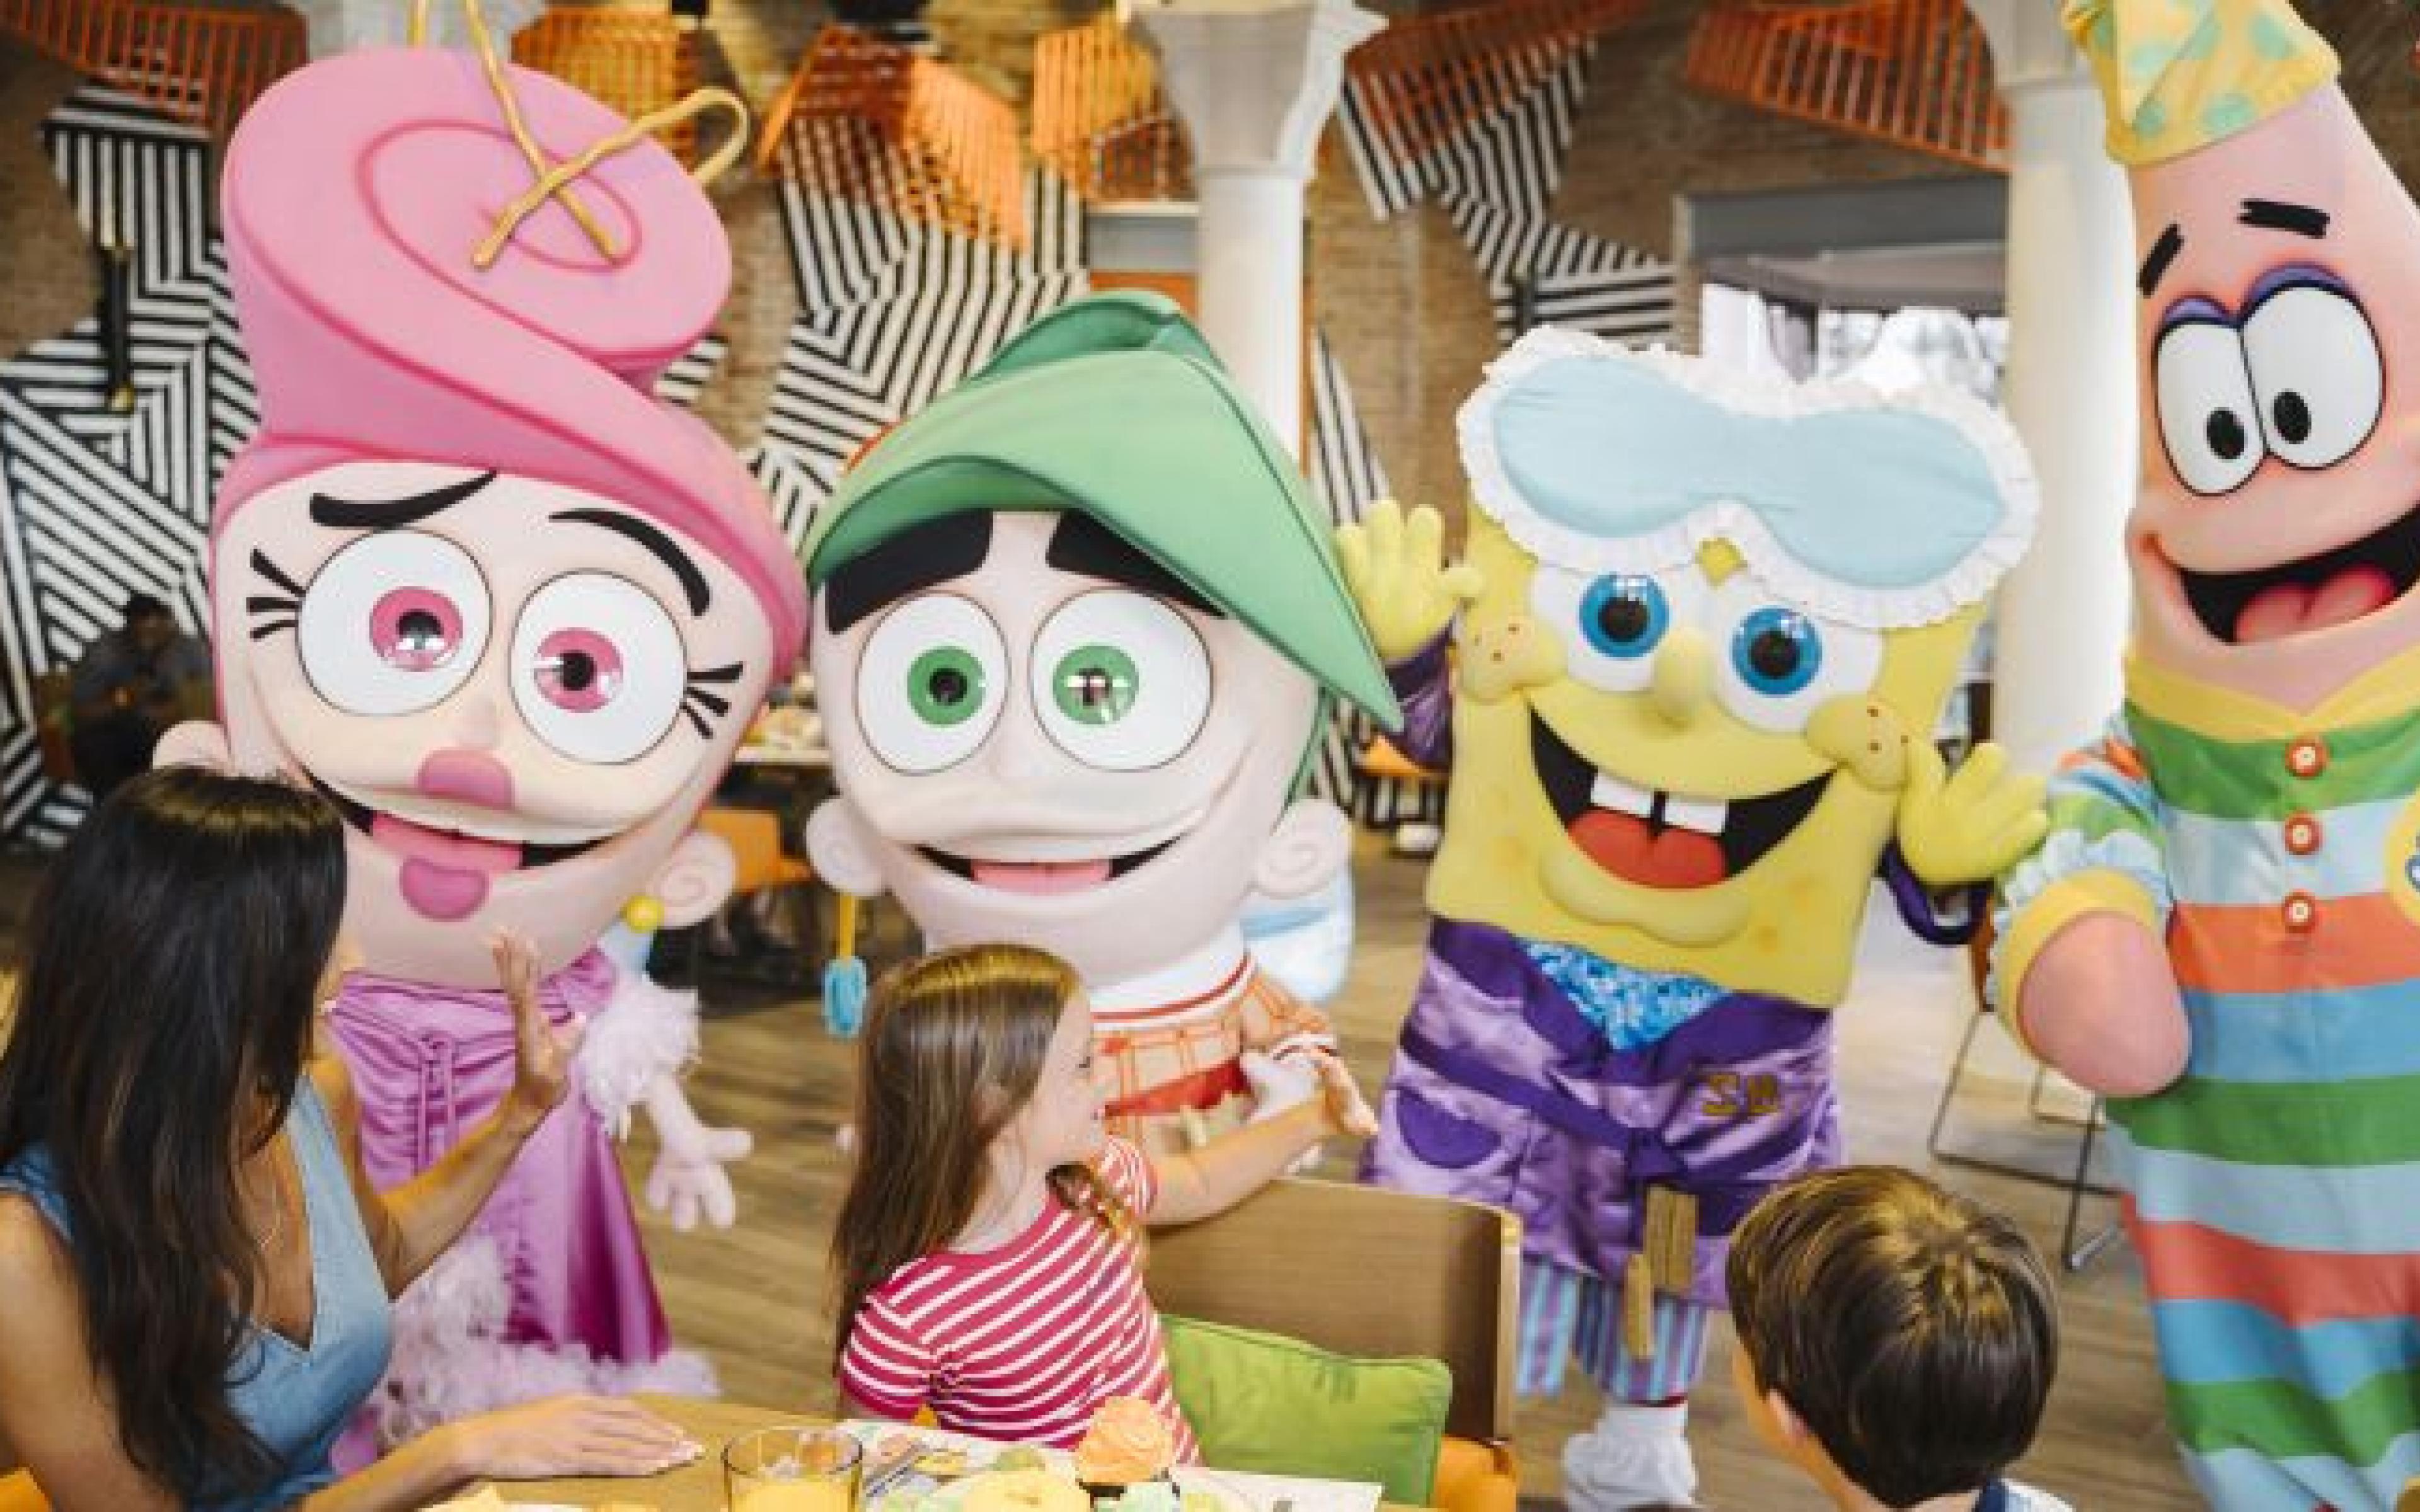 Nickelodeon characters greeting children at a table